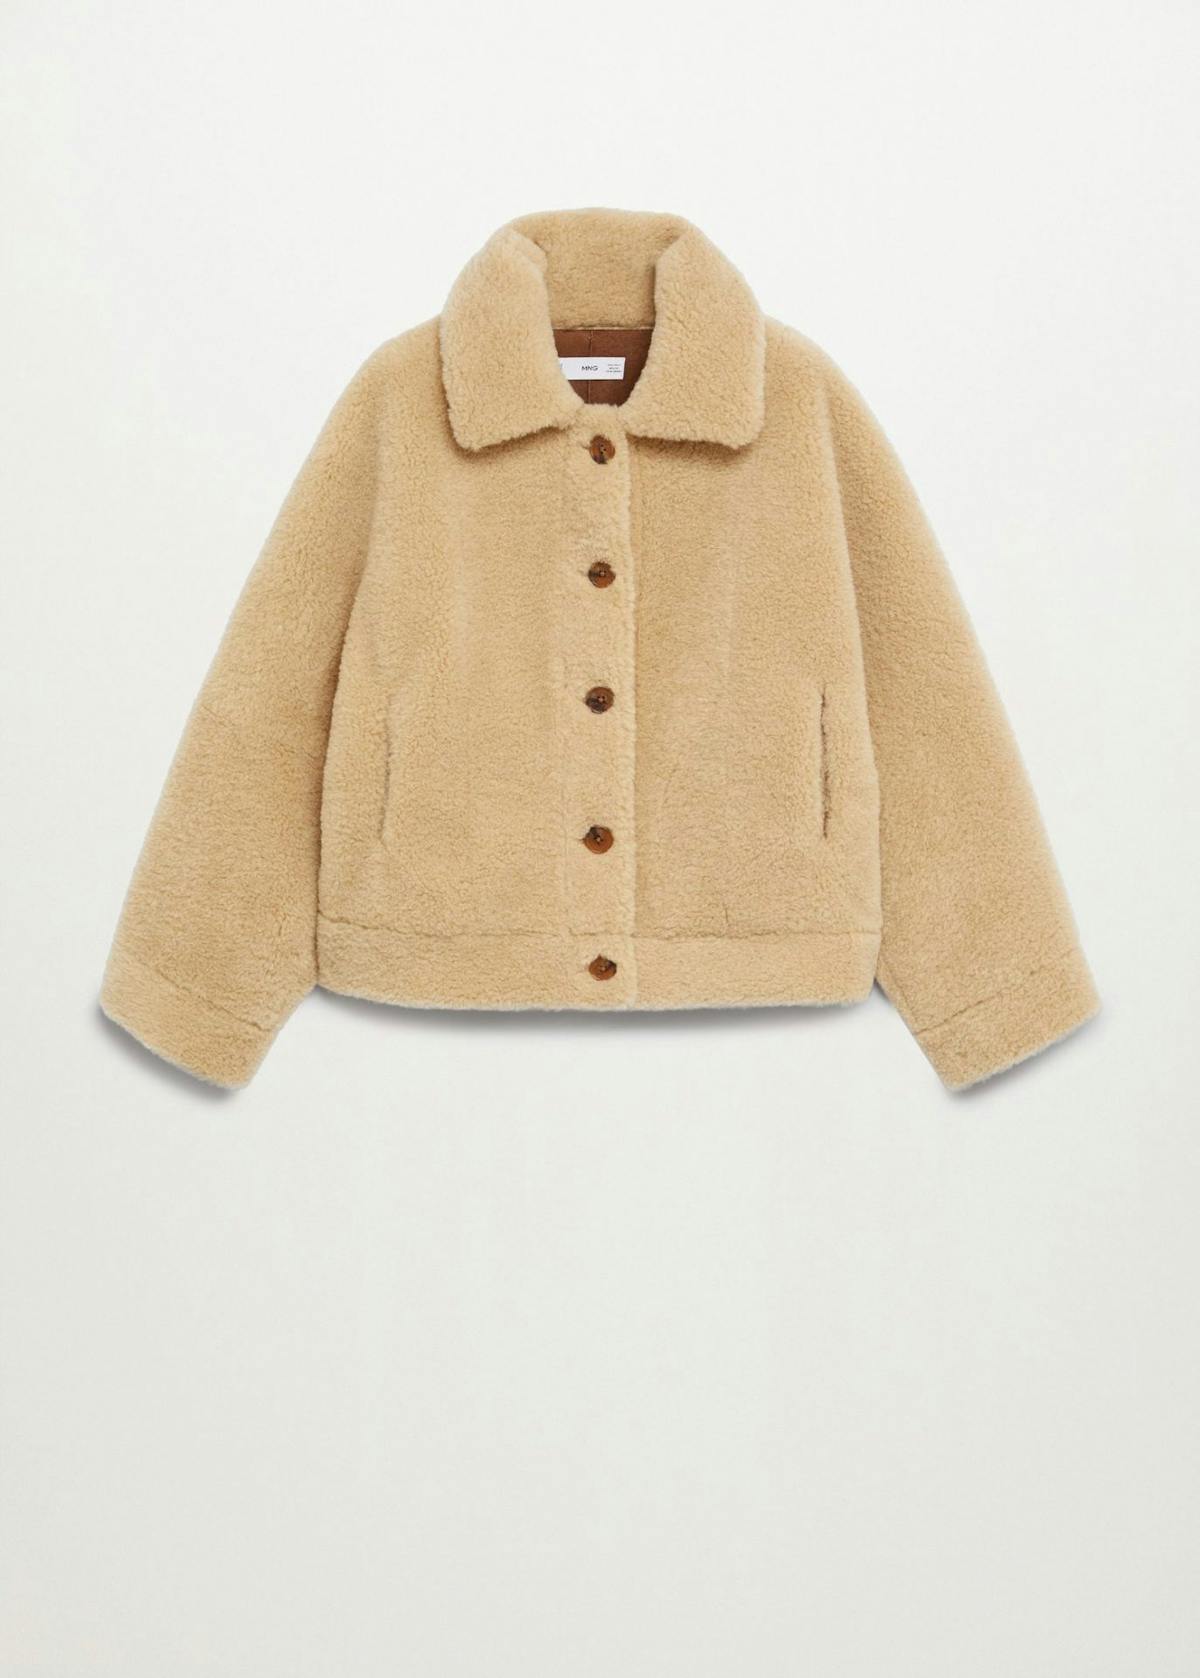 Best teddy coats and jackets for winter